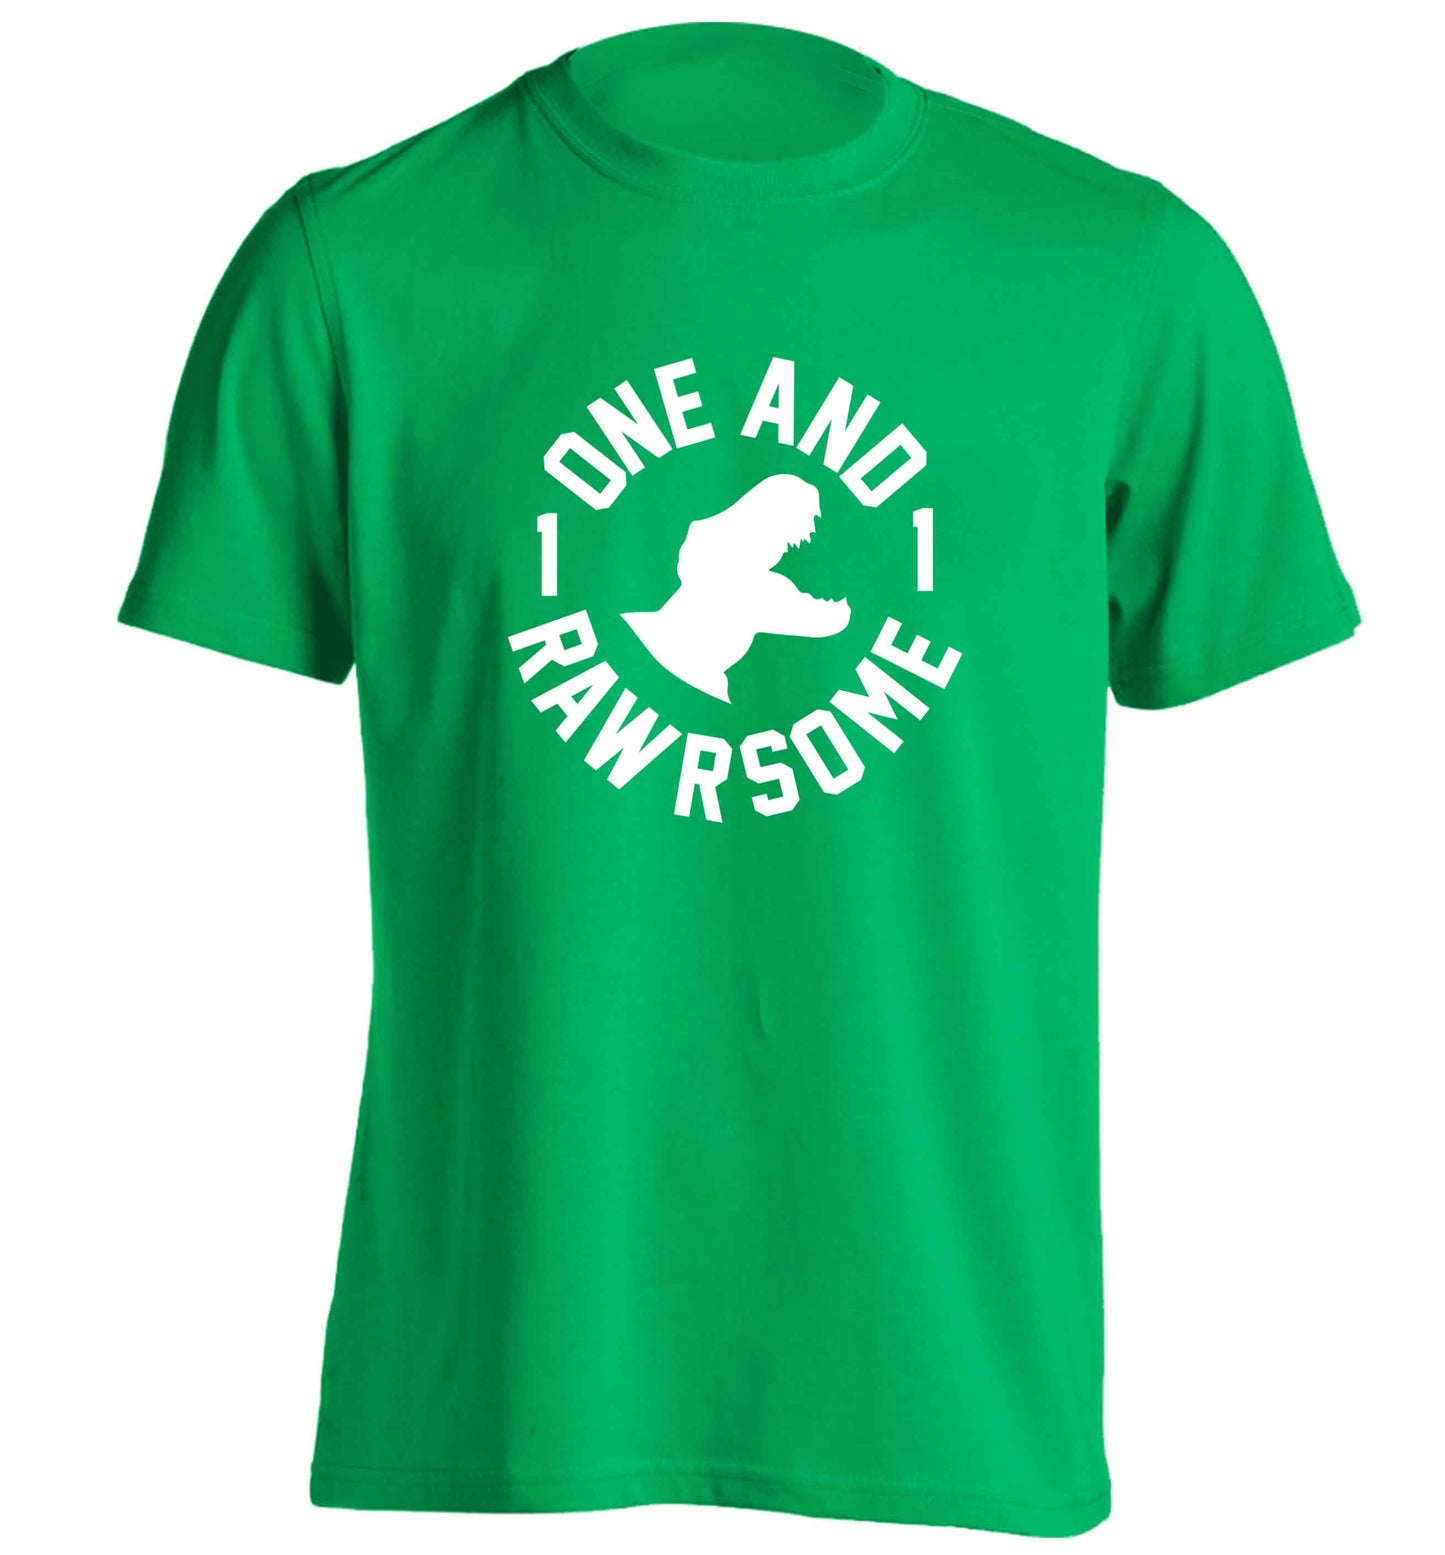 One and Rawrsome adults unisex green Tshirt 2XL